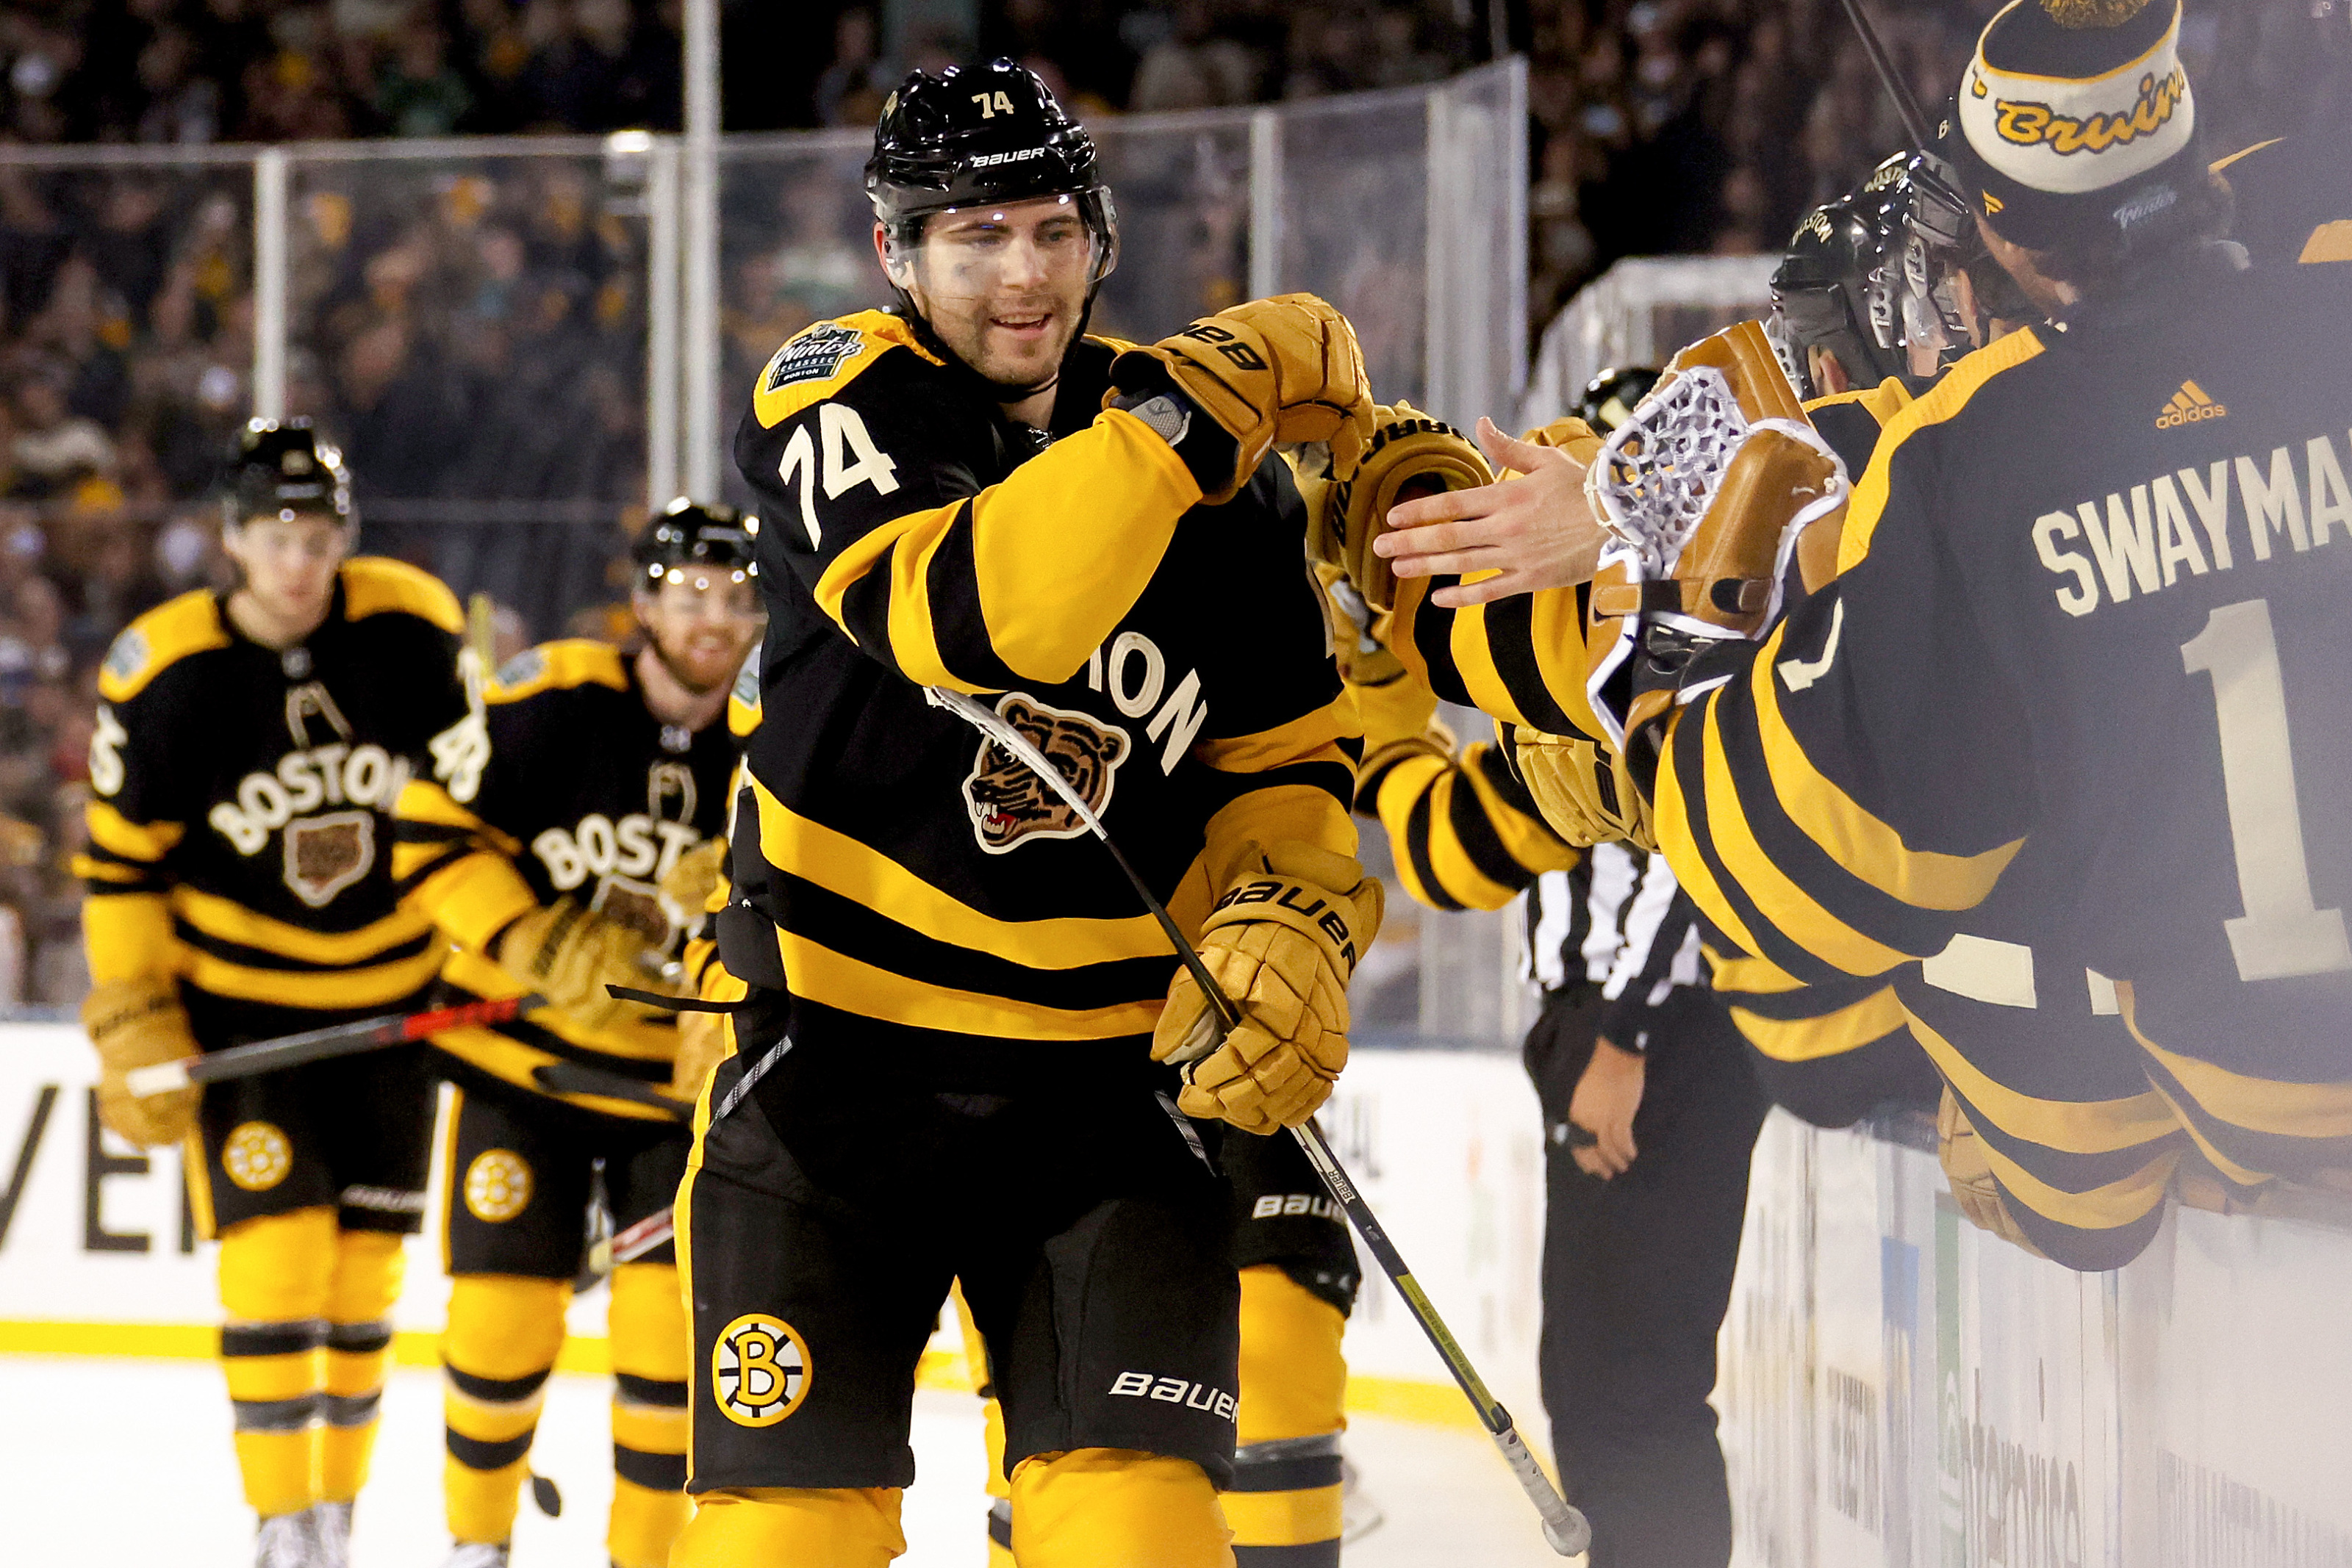 Boston Bruins to receive jersey redesign from Adidas for 2017-18